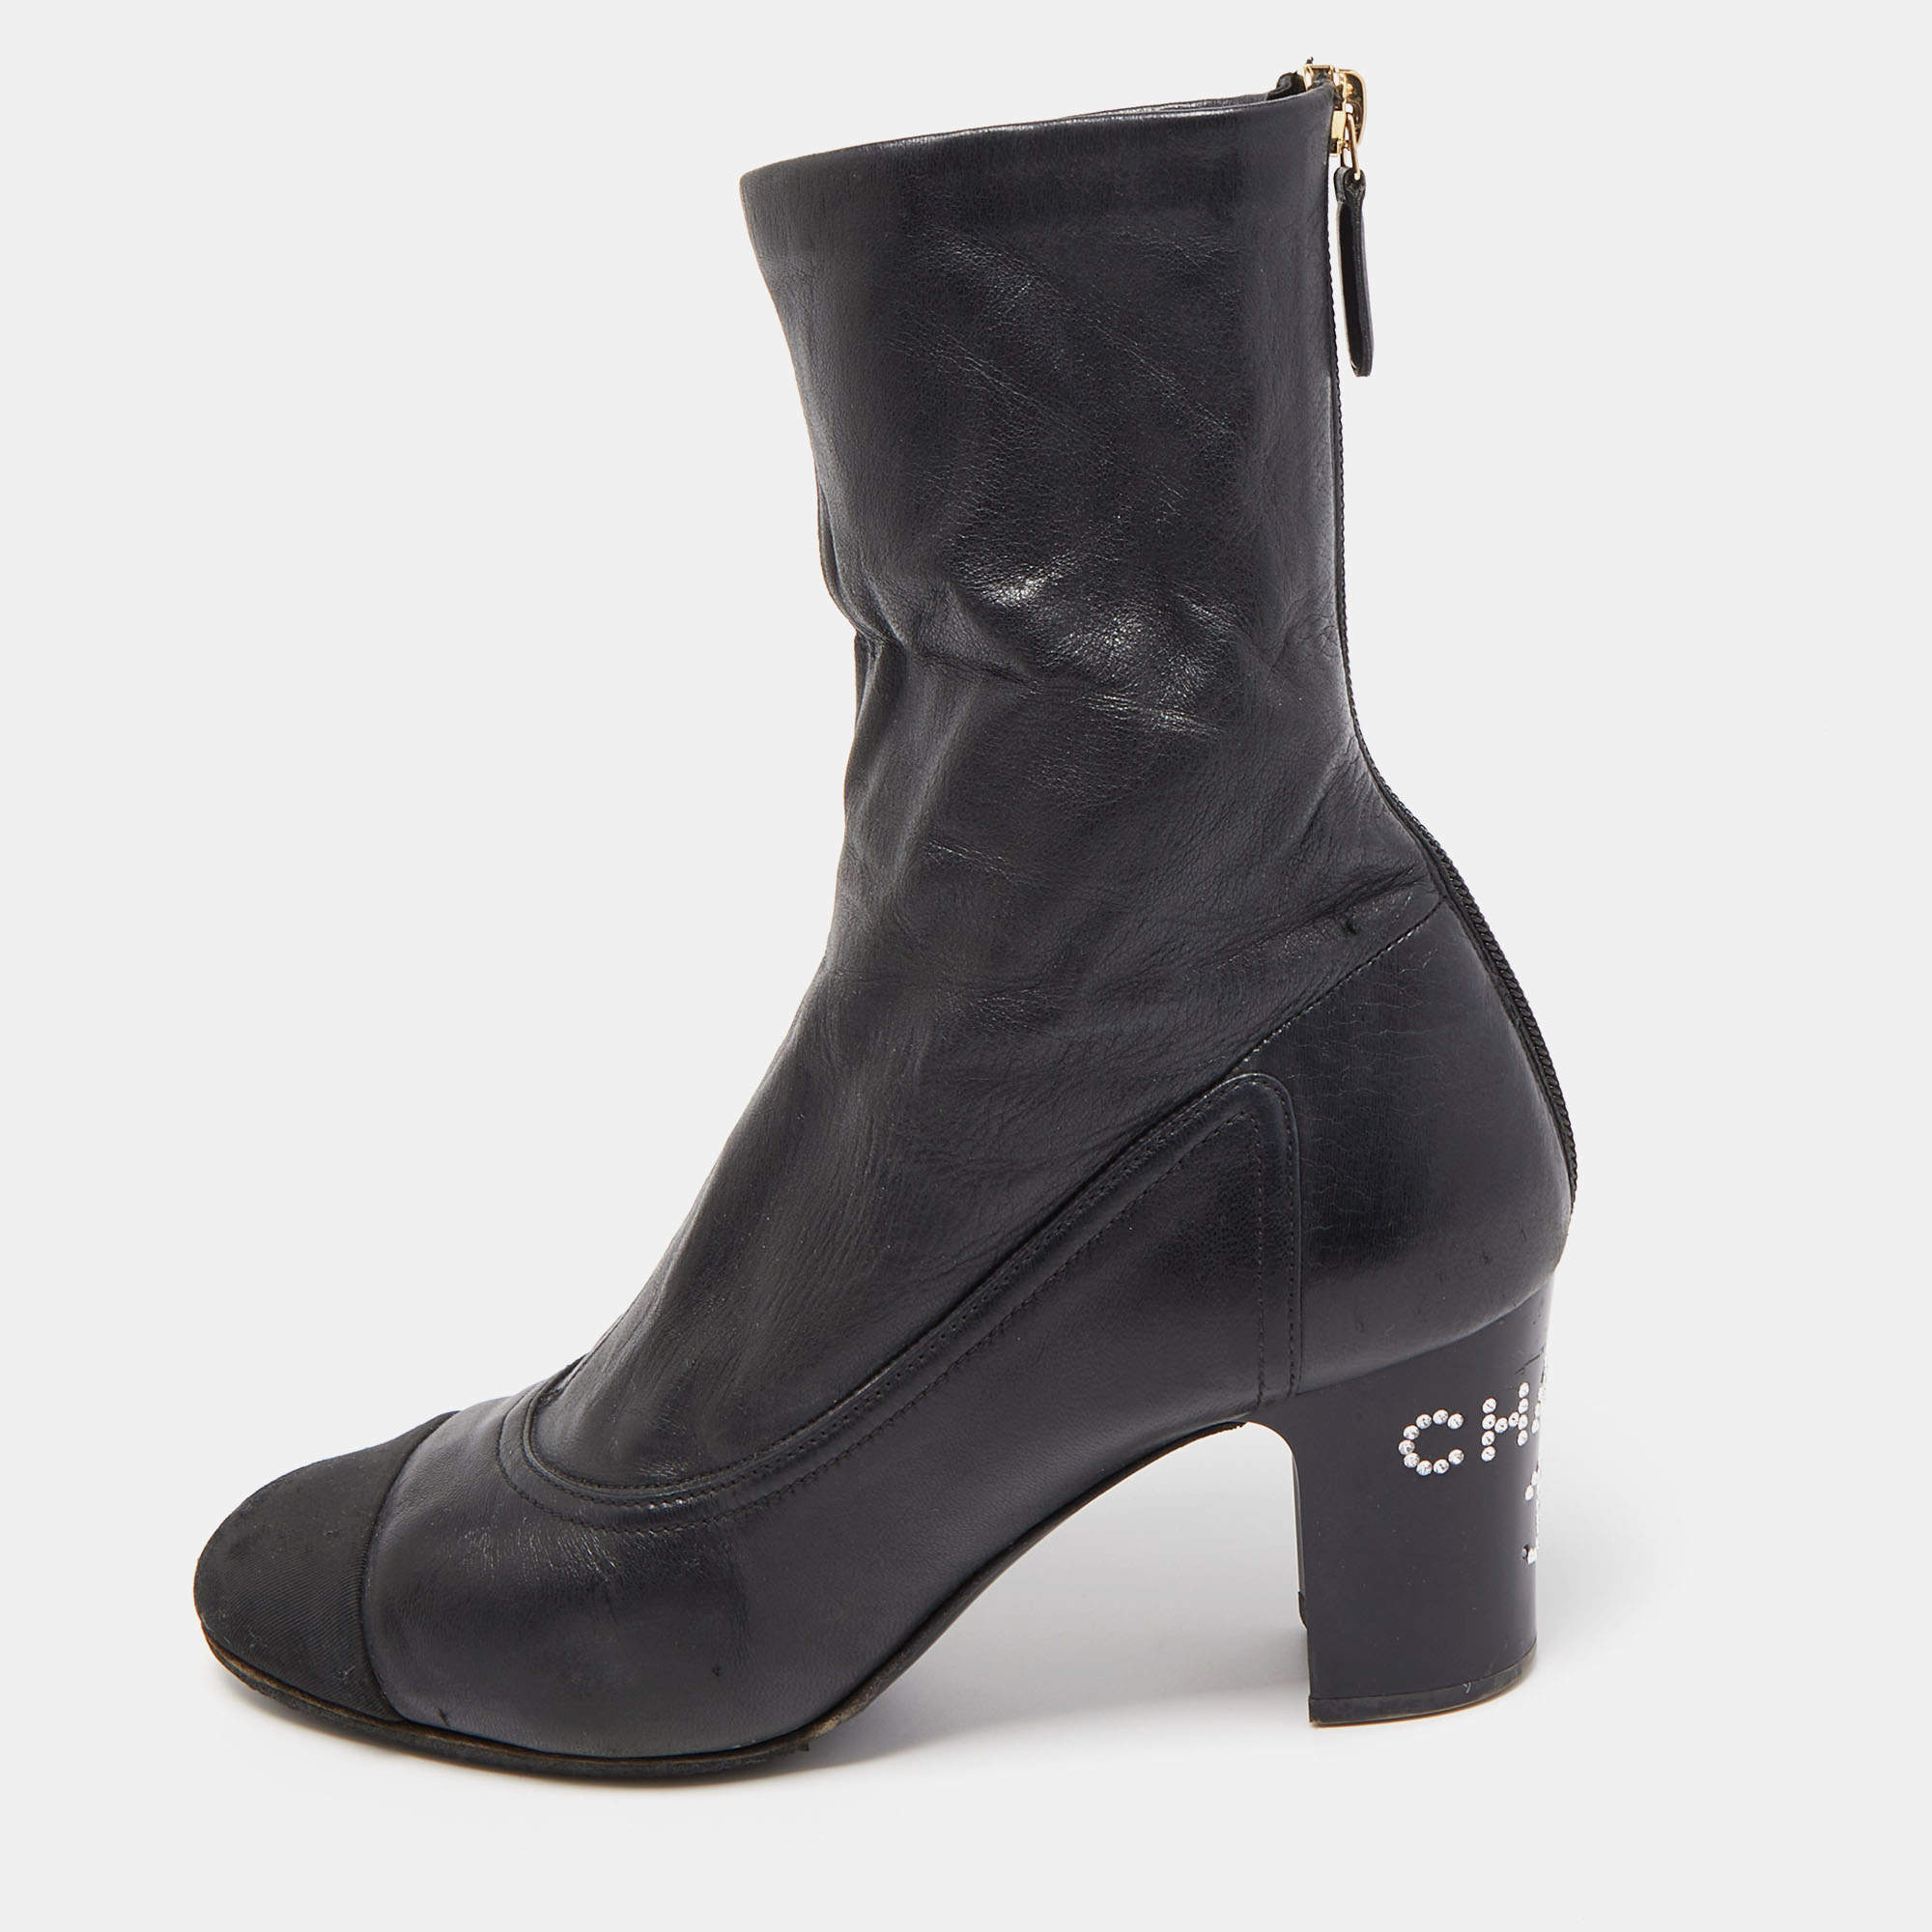 Chanel Black Canvas and Leather CC Cap Toe Ankle Boots Size 39 Chanel